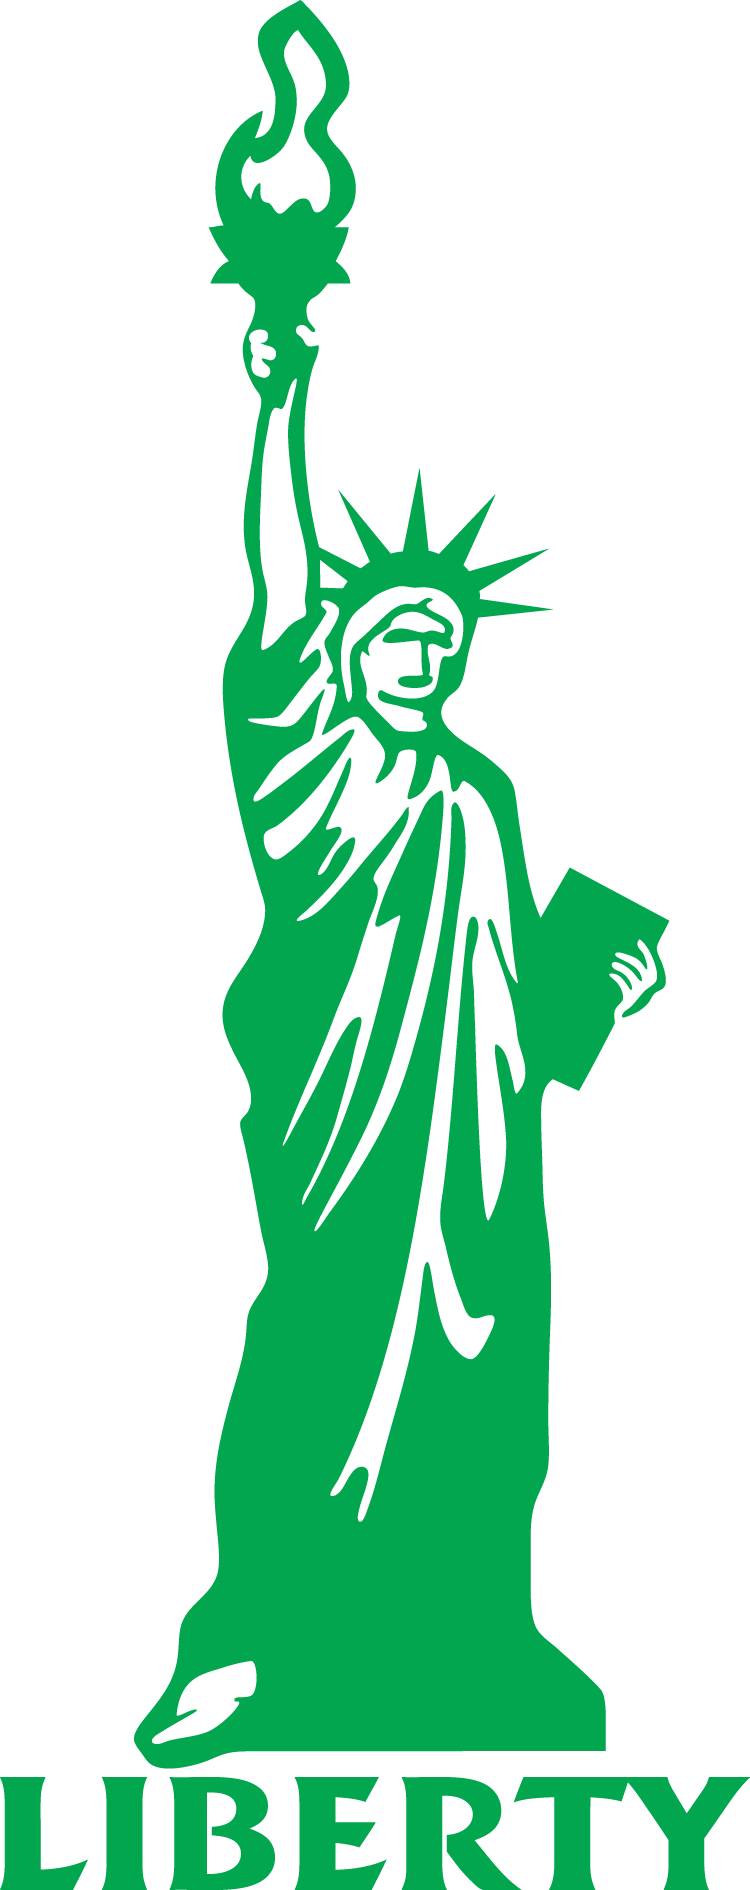 Statue of liberty animated clip art